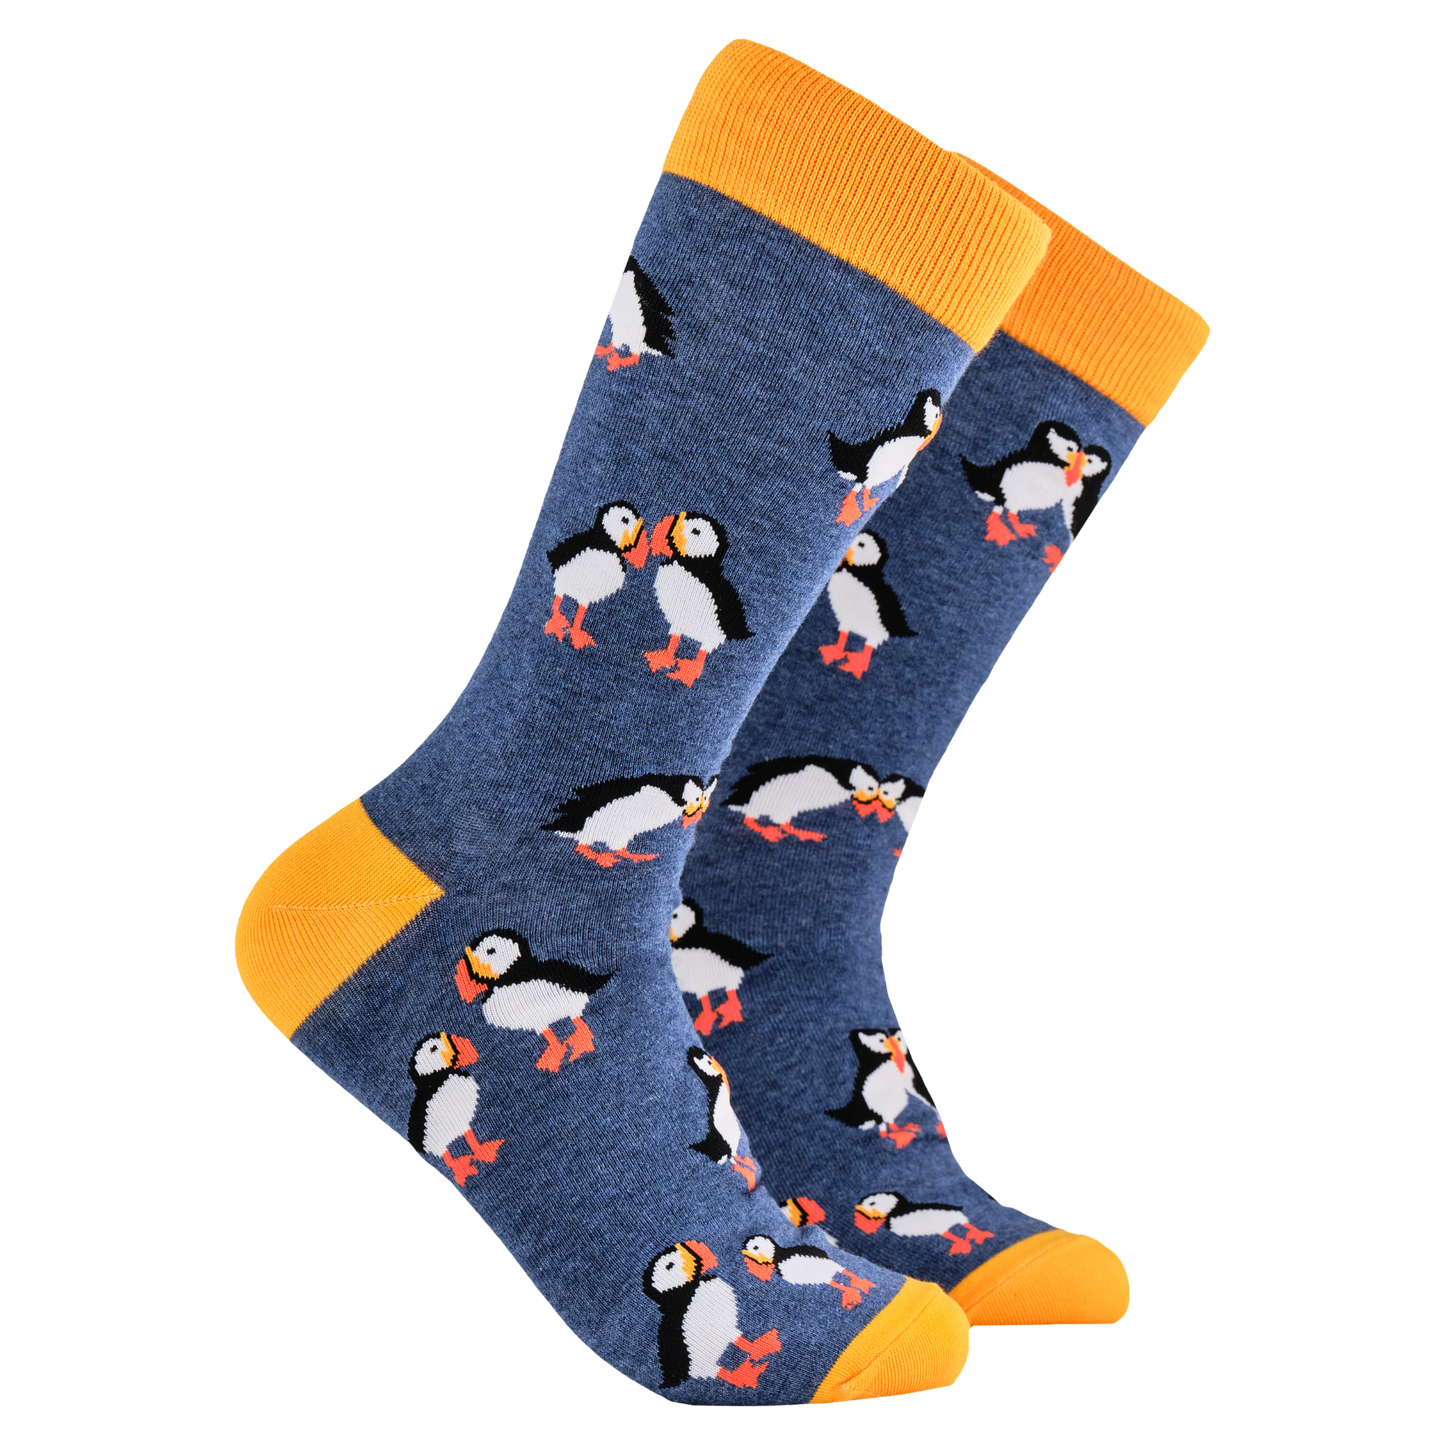 Puffin Socks - Mate For Life. A pair of socks depicting tea cups and tea pots. Blue legs, yellow cuff, heel and toe.